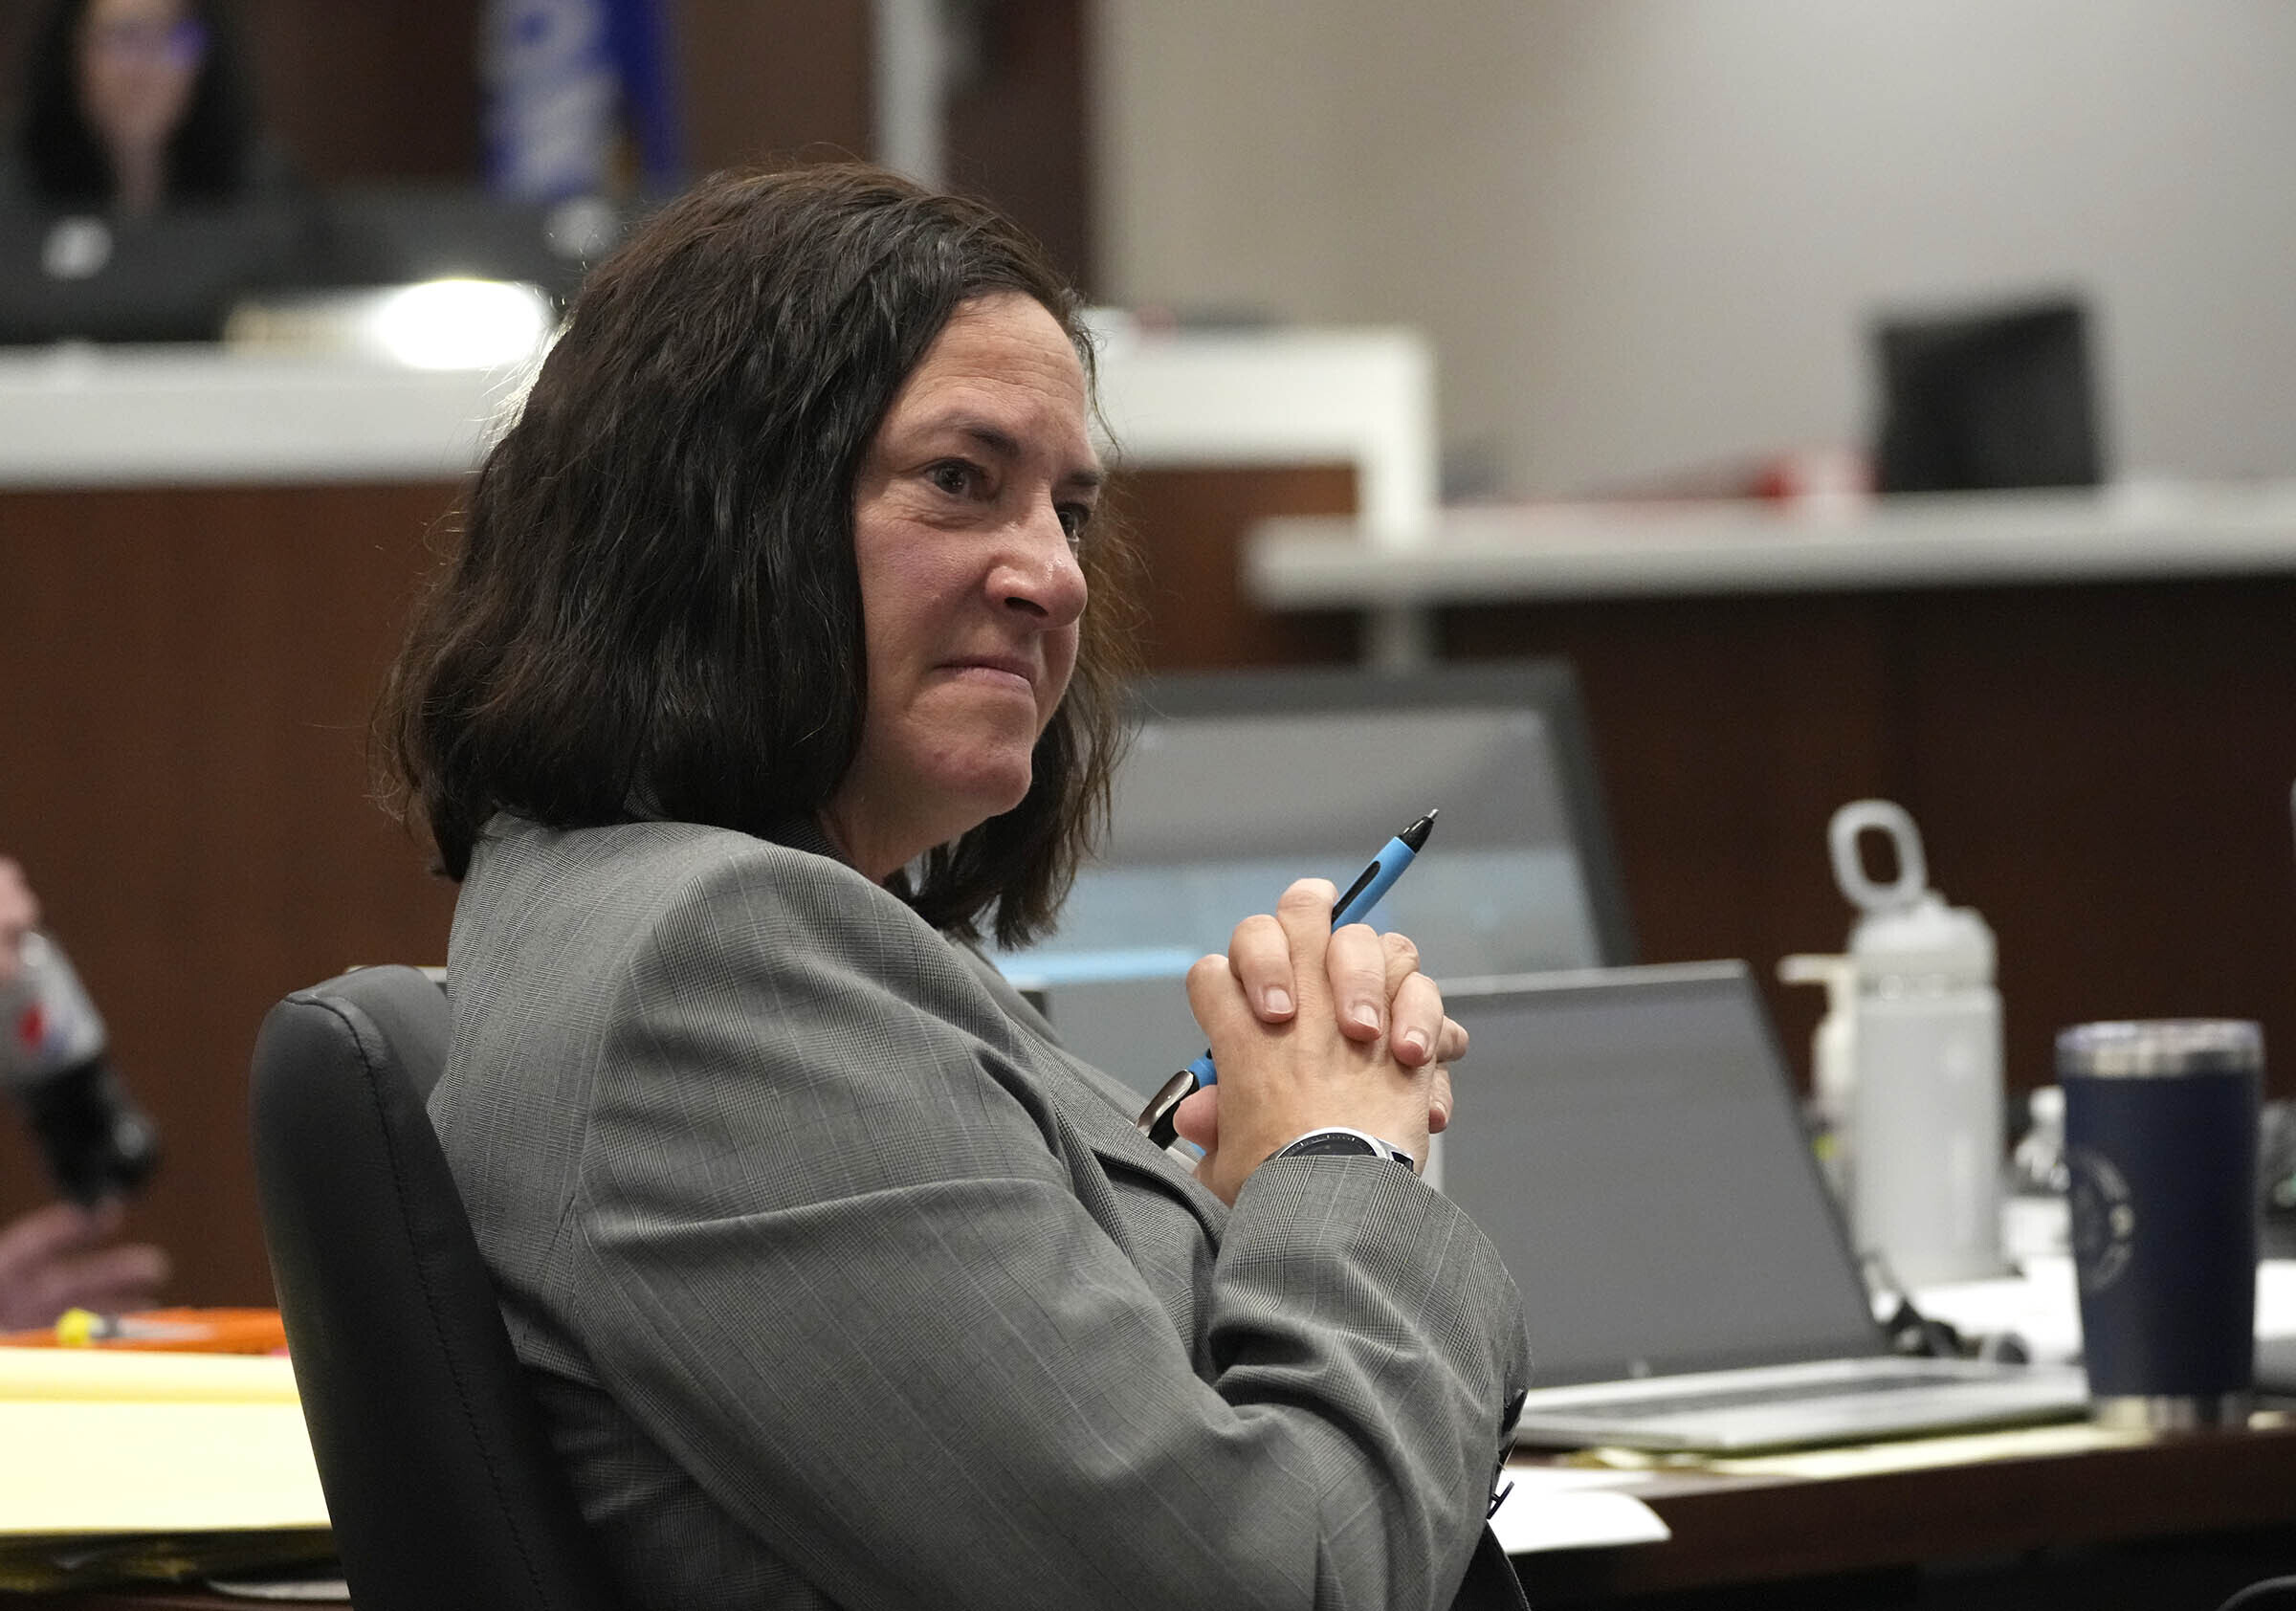 Waukesha County District Attorney Susan Opper appears in Waukesha County Circuit Court